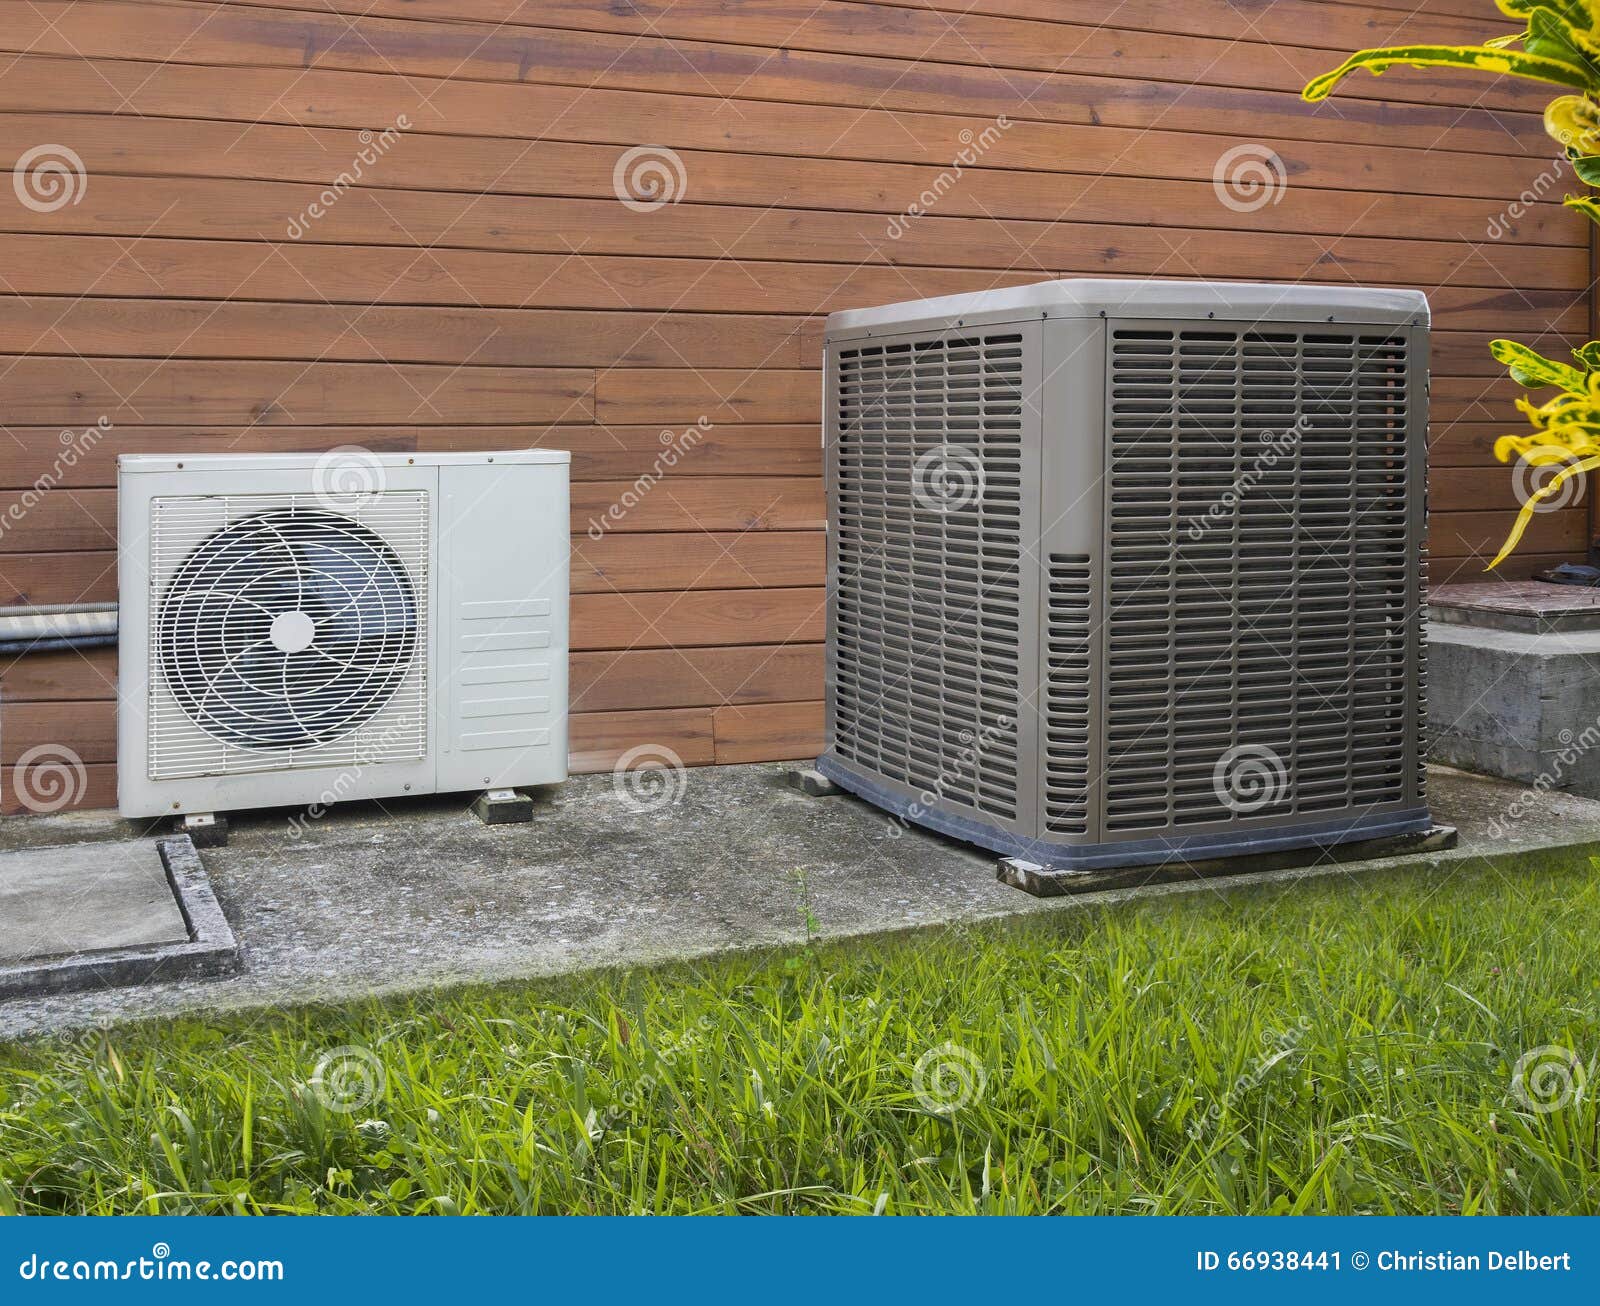 two air conditioning heat pump